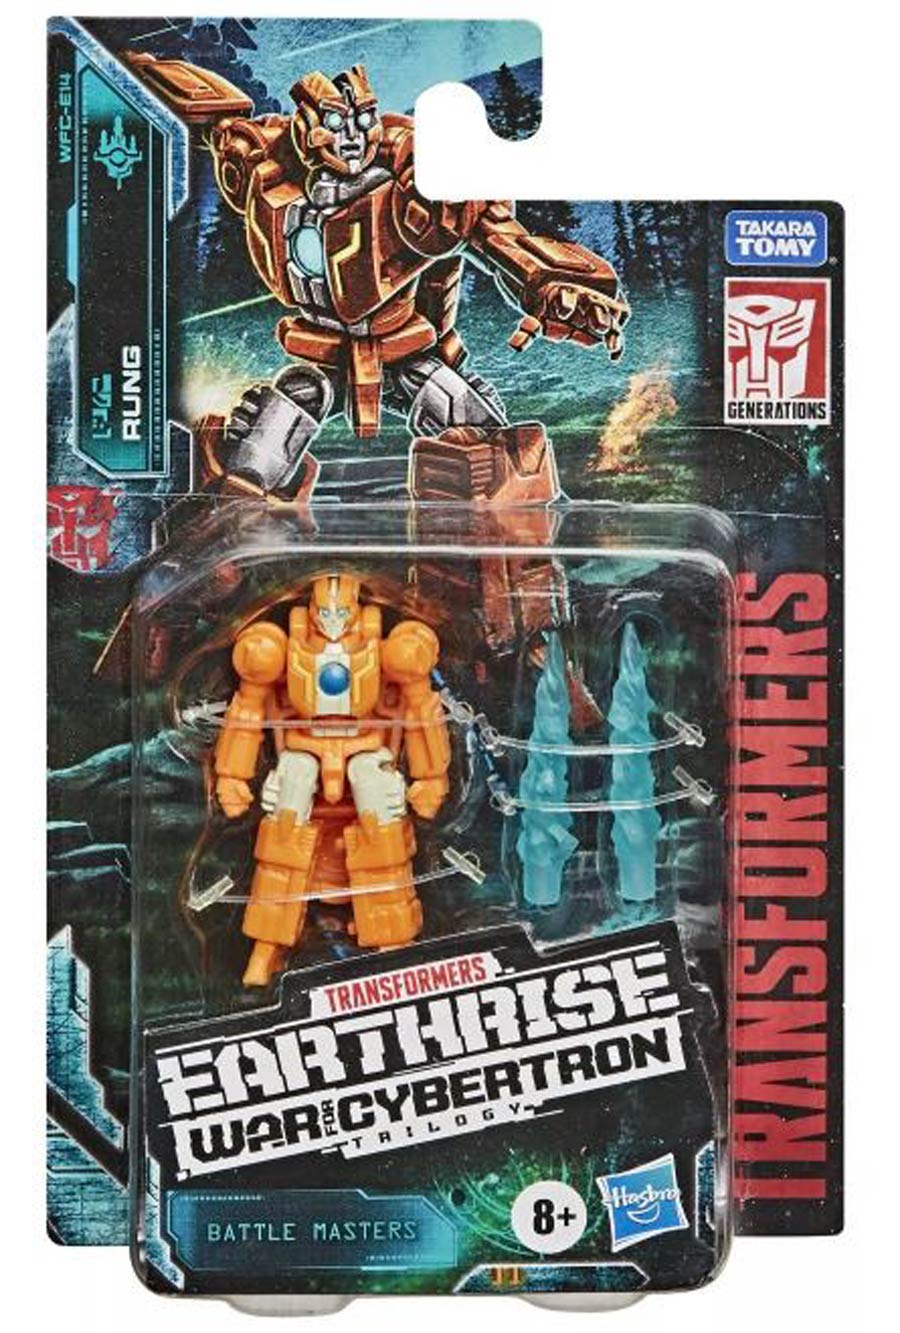 Transformers Generations War For Cybertron Earthrise Battle Masters Action Figure - Rung